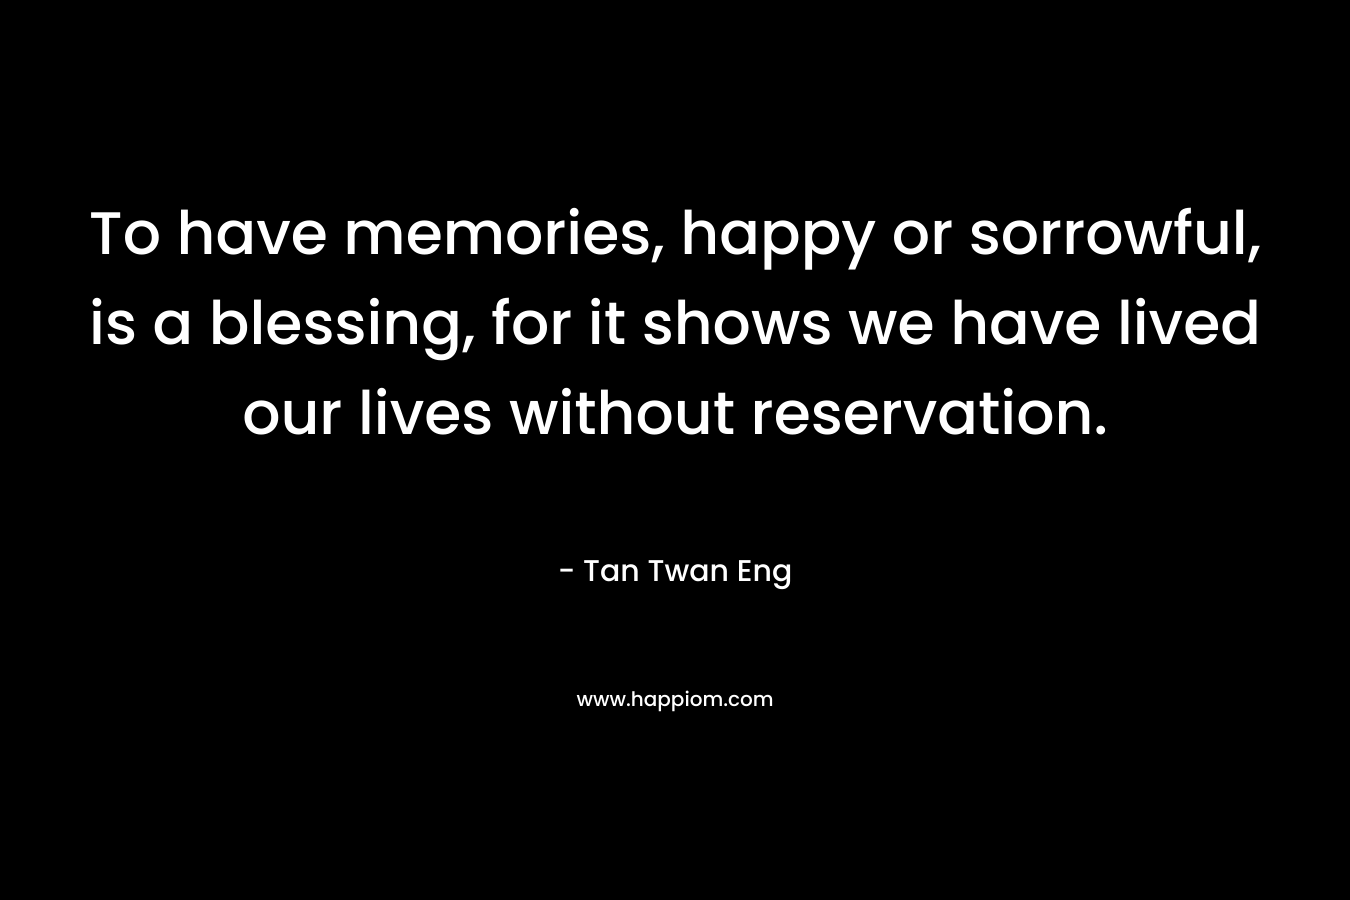 To have memories, happy or sorrowful, is a blessing, for it shows we have lived our lives without reservation.